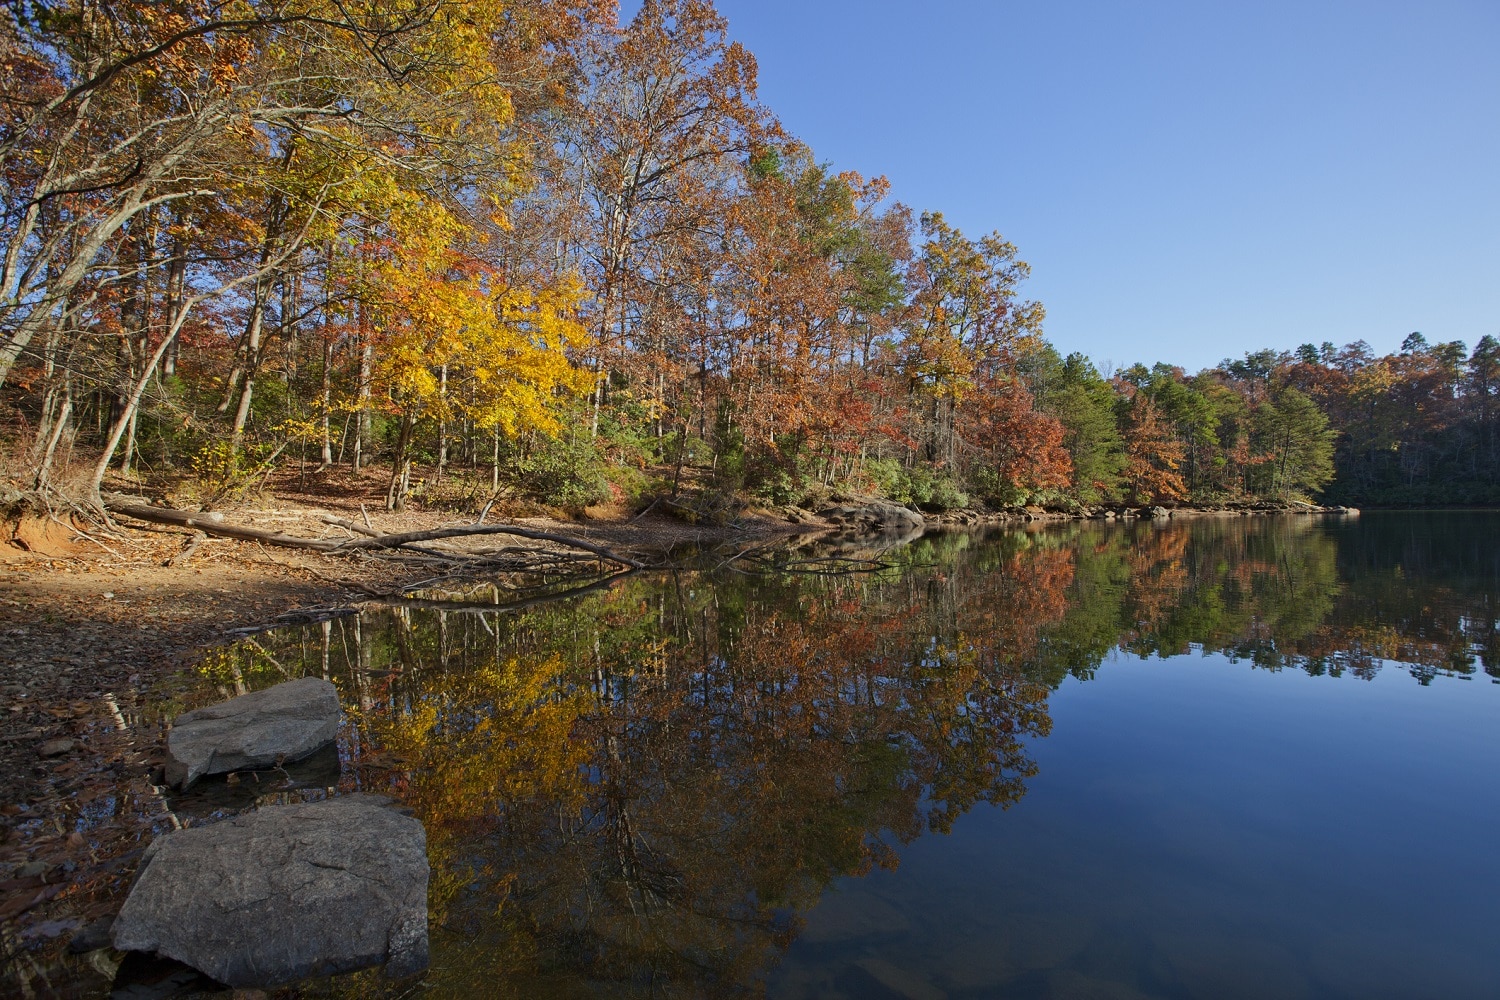 An autumn scenic of a Lake